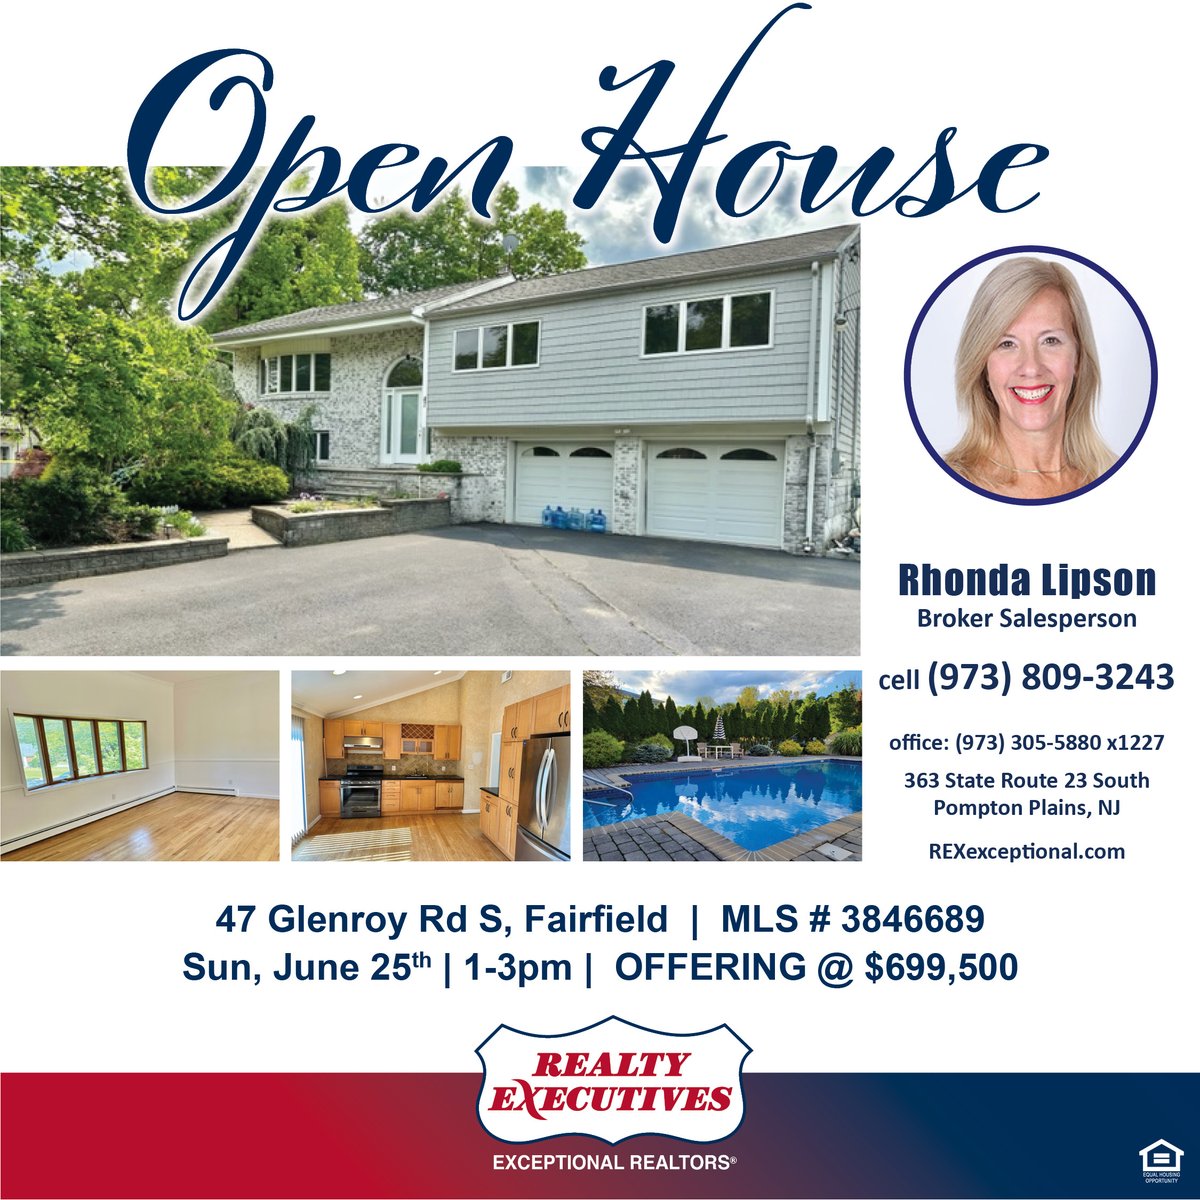 😍OPEN HOUSE ✏Sunday, June 25th ⏰1pm - 3pm 💲699,500 🚗47 Glenroy Rd S, Fairfield, NJ 🏠For entertainment enjoy the inground pool, and covered patio with extended grass for fun, and games! #openhouse #fairfieldnj #ingroundpool #coveredpatio #recroom #highceiling #extendeddeck